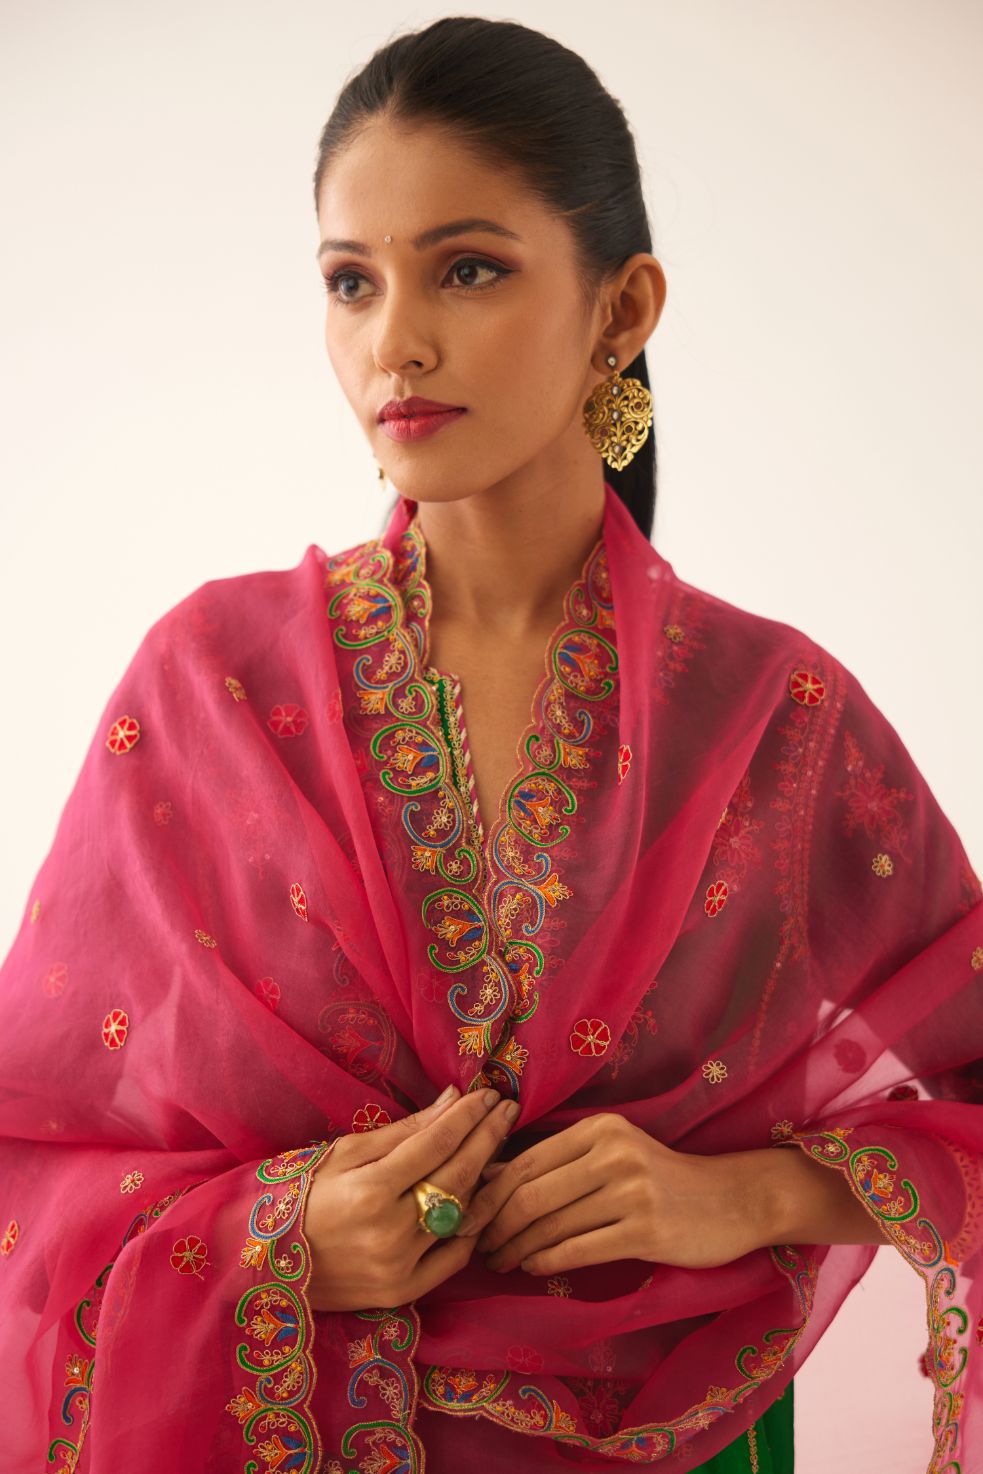 Fuchsia silk organza dupatta with all-over delicate dori & silk thread embroidery, highlighted with bead and sequins work.